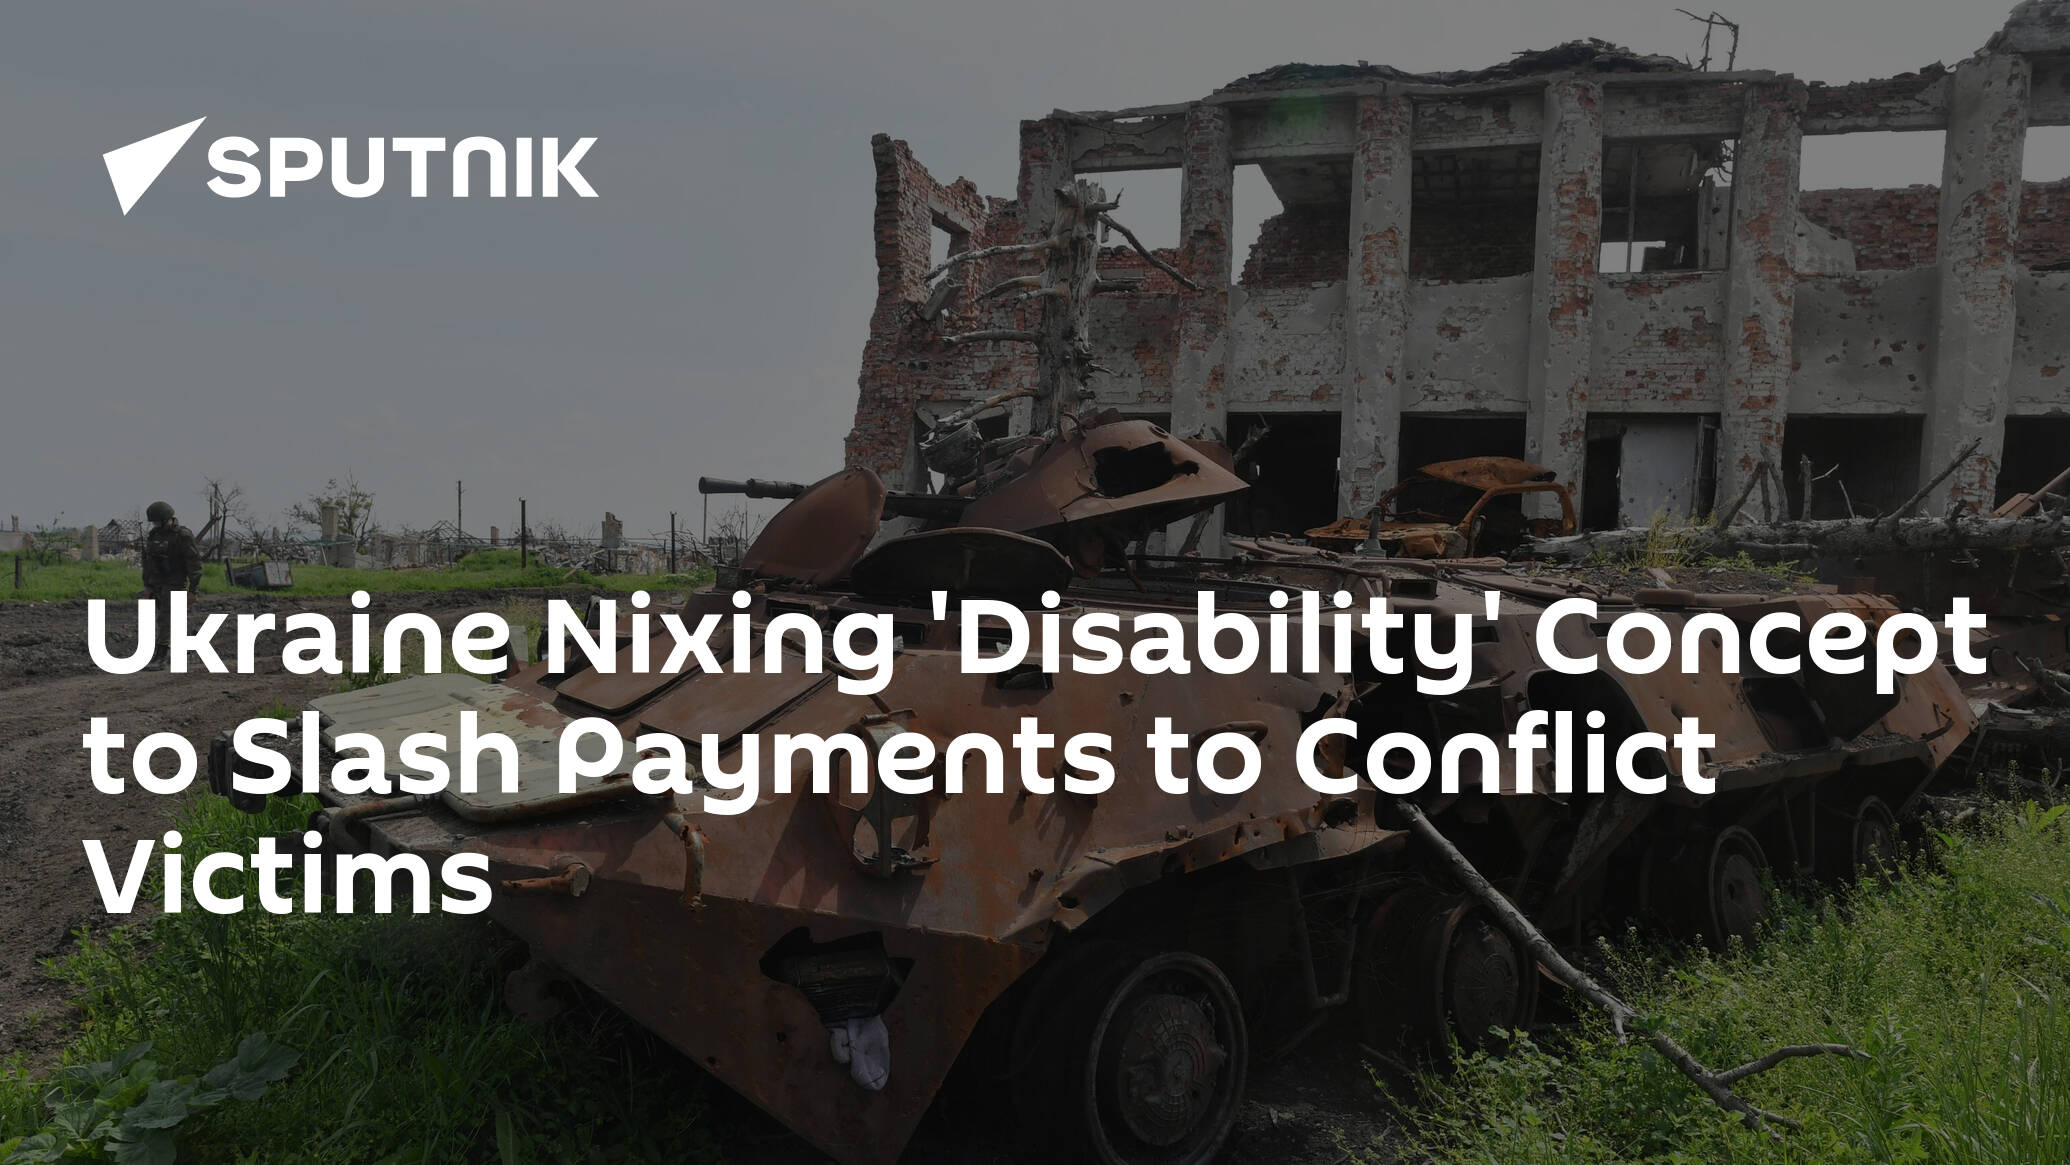 Ukraine Nixing 'Disability' Concept to Slash Payments to Conflict Victims